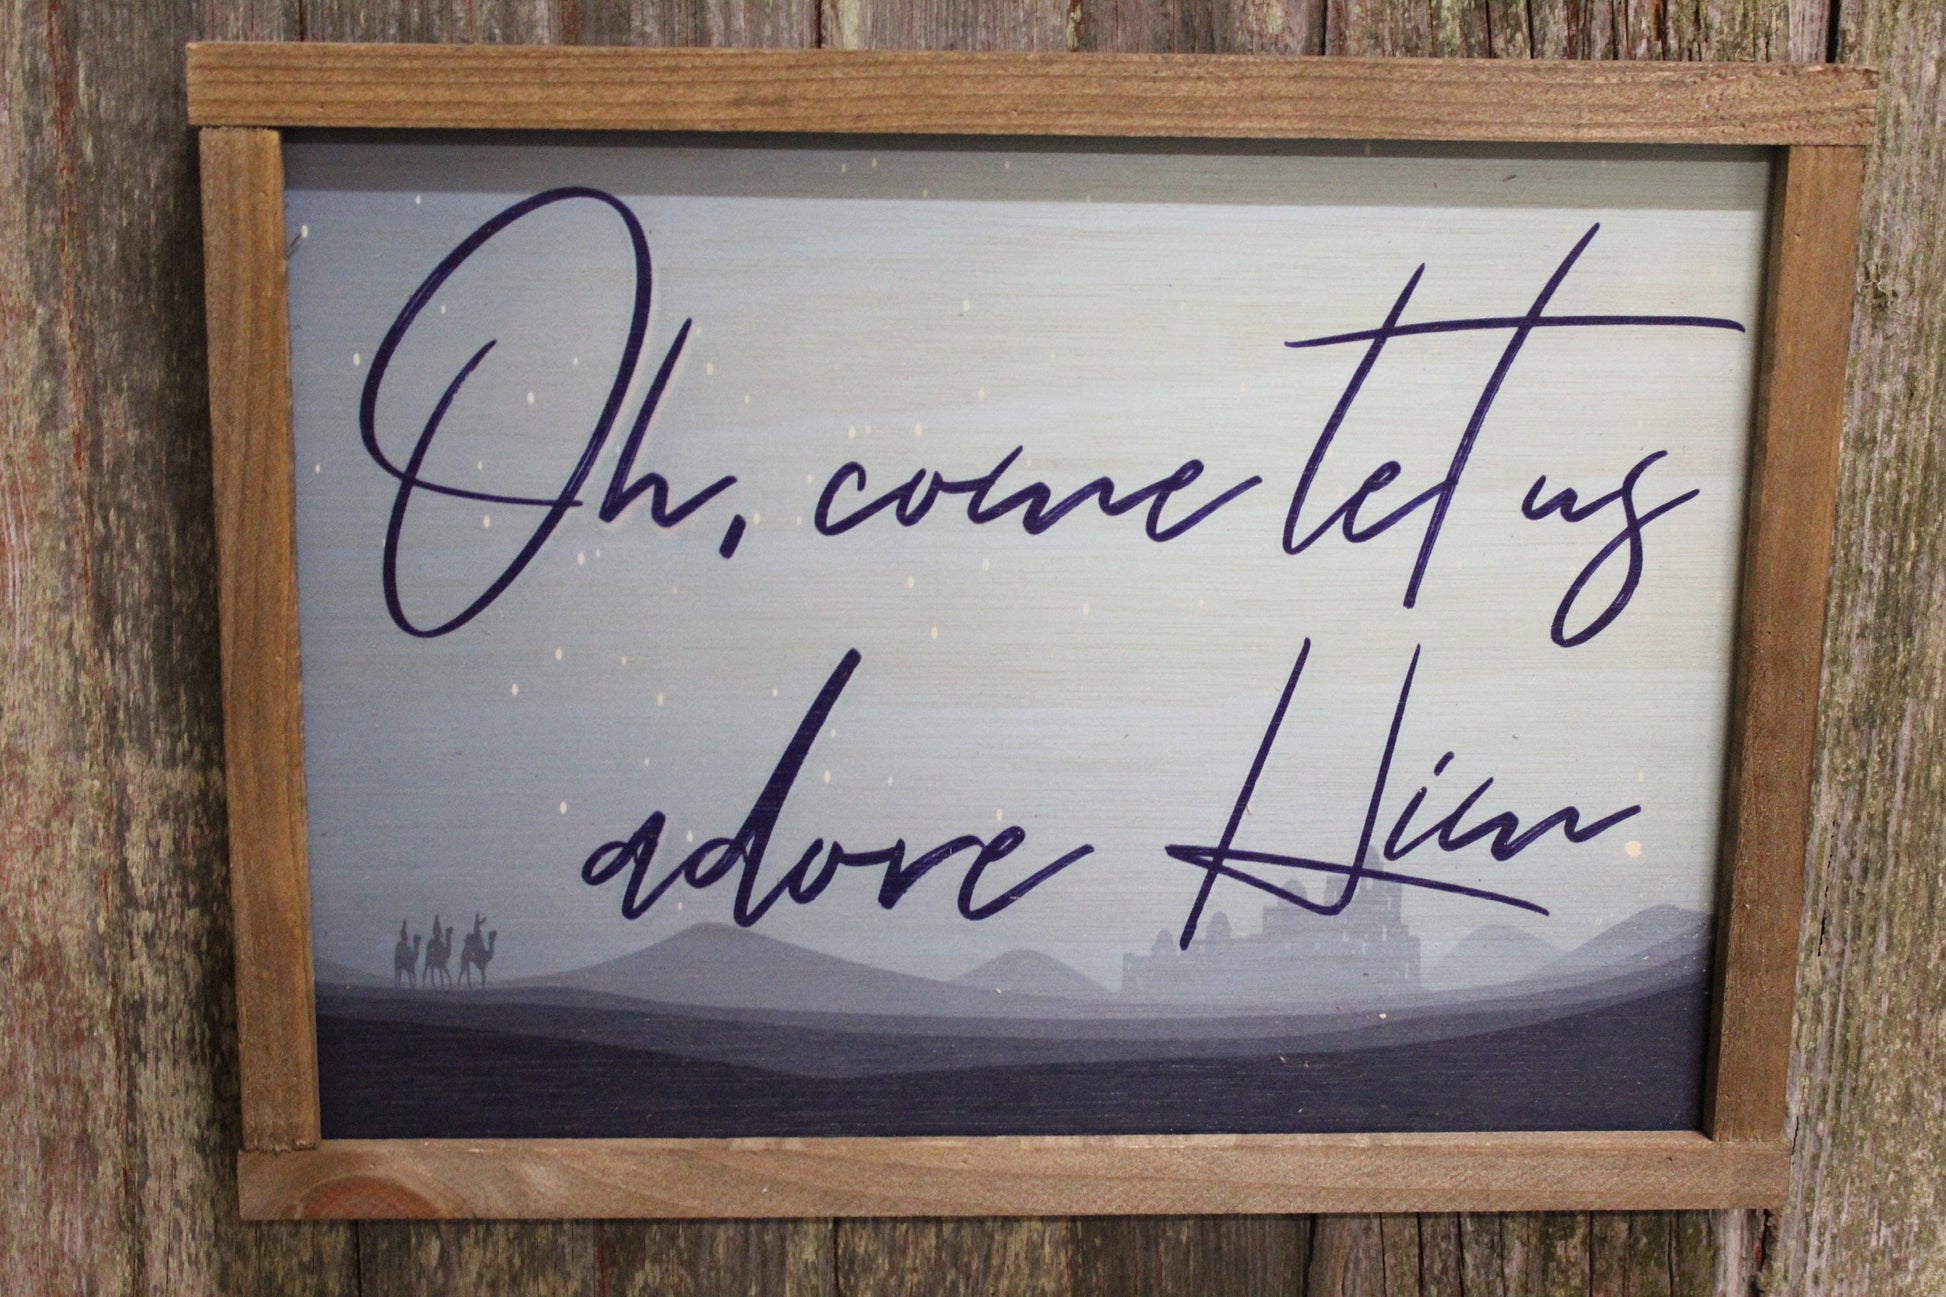 Oh Come Let Us Adore Him Wood Sign Three Wiseman Christmas Wall Décor Rustic Framed Print Farmhouse Decoration Primitive